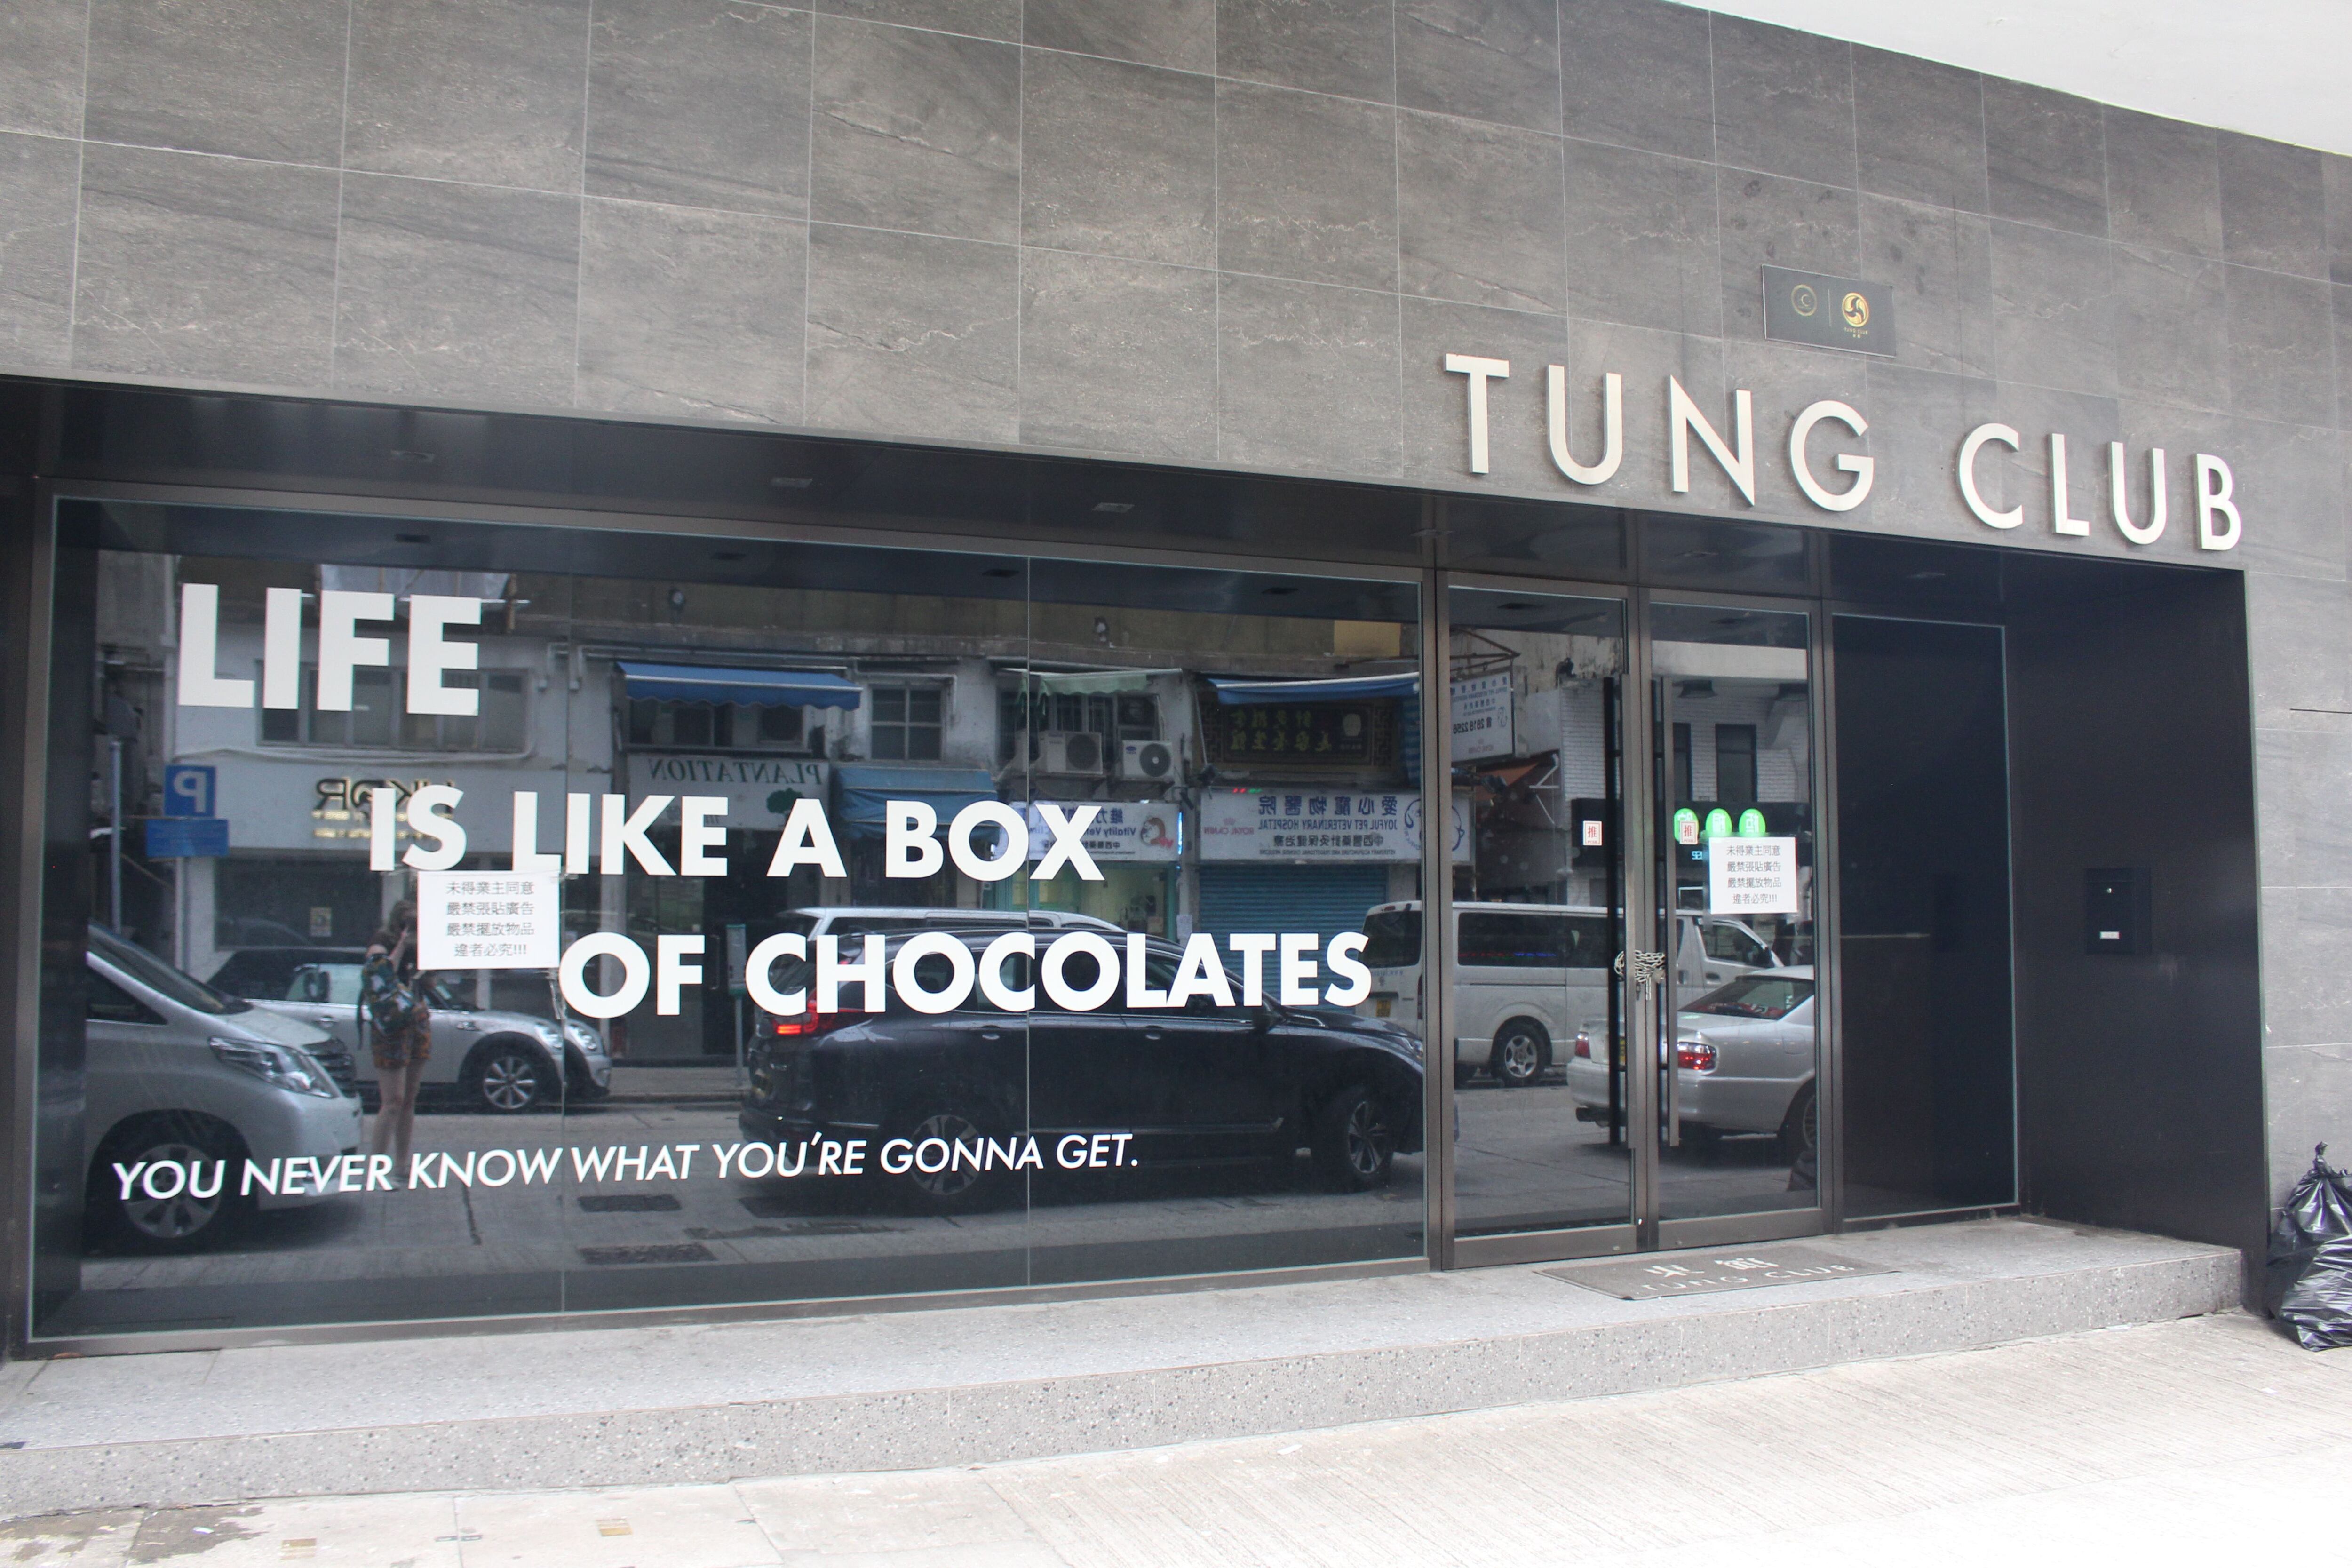 Tung Club in Kennedy Town was run by local crypto influencer Henry Choi. Photocredit: Callan Quinn/ DL News